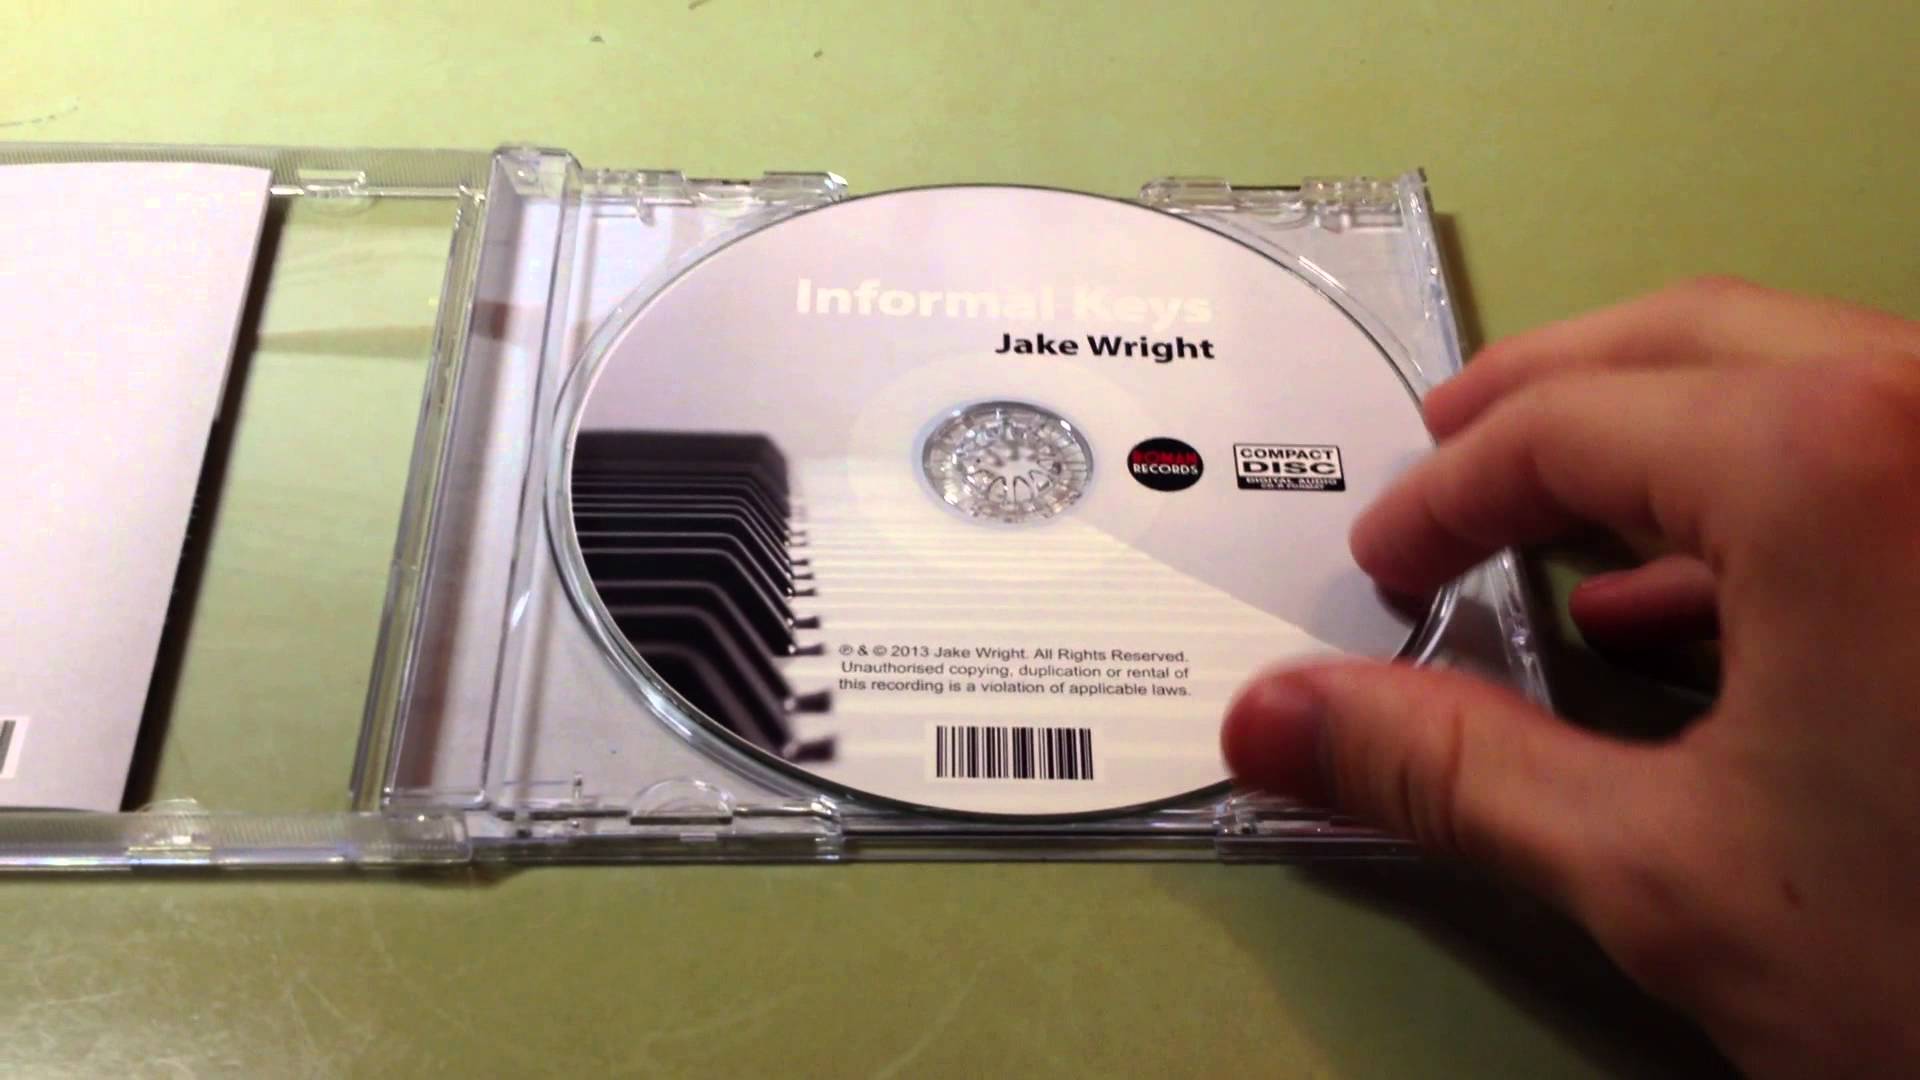 Publish Your Own CD for Free - YouTube